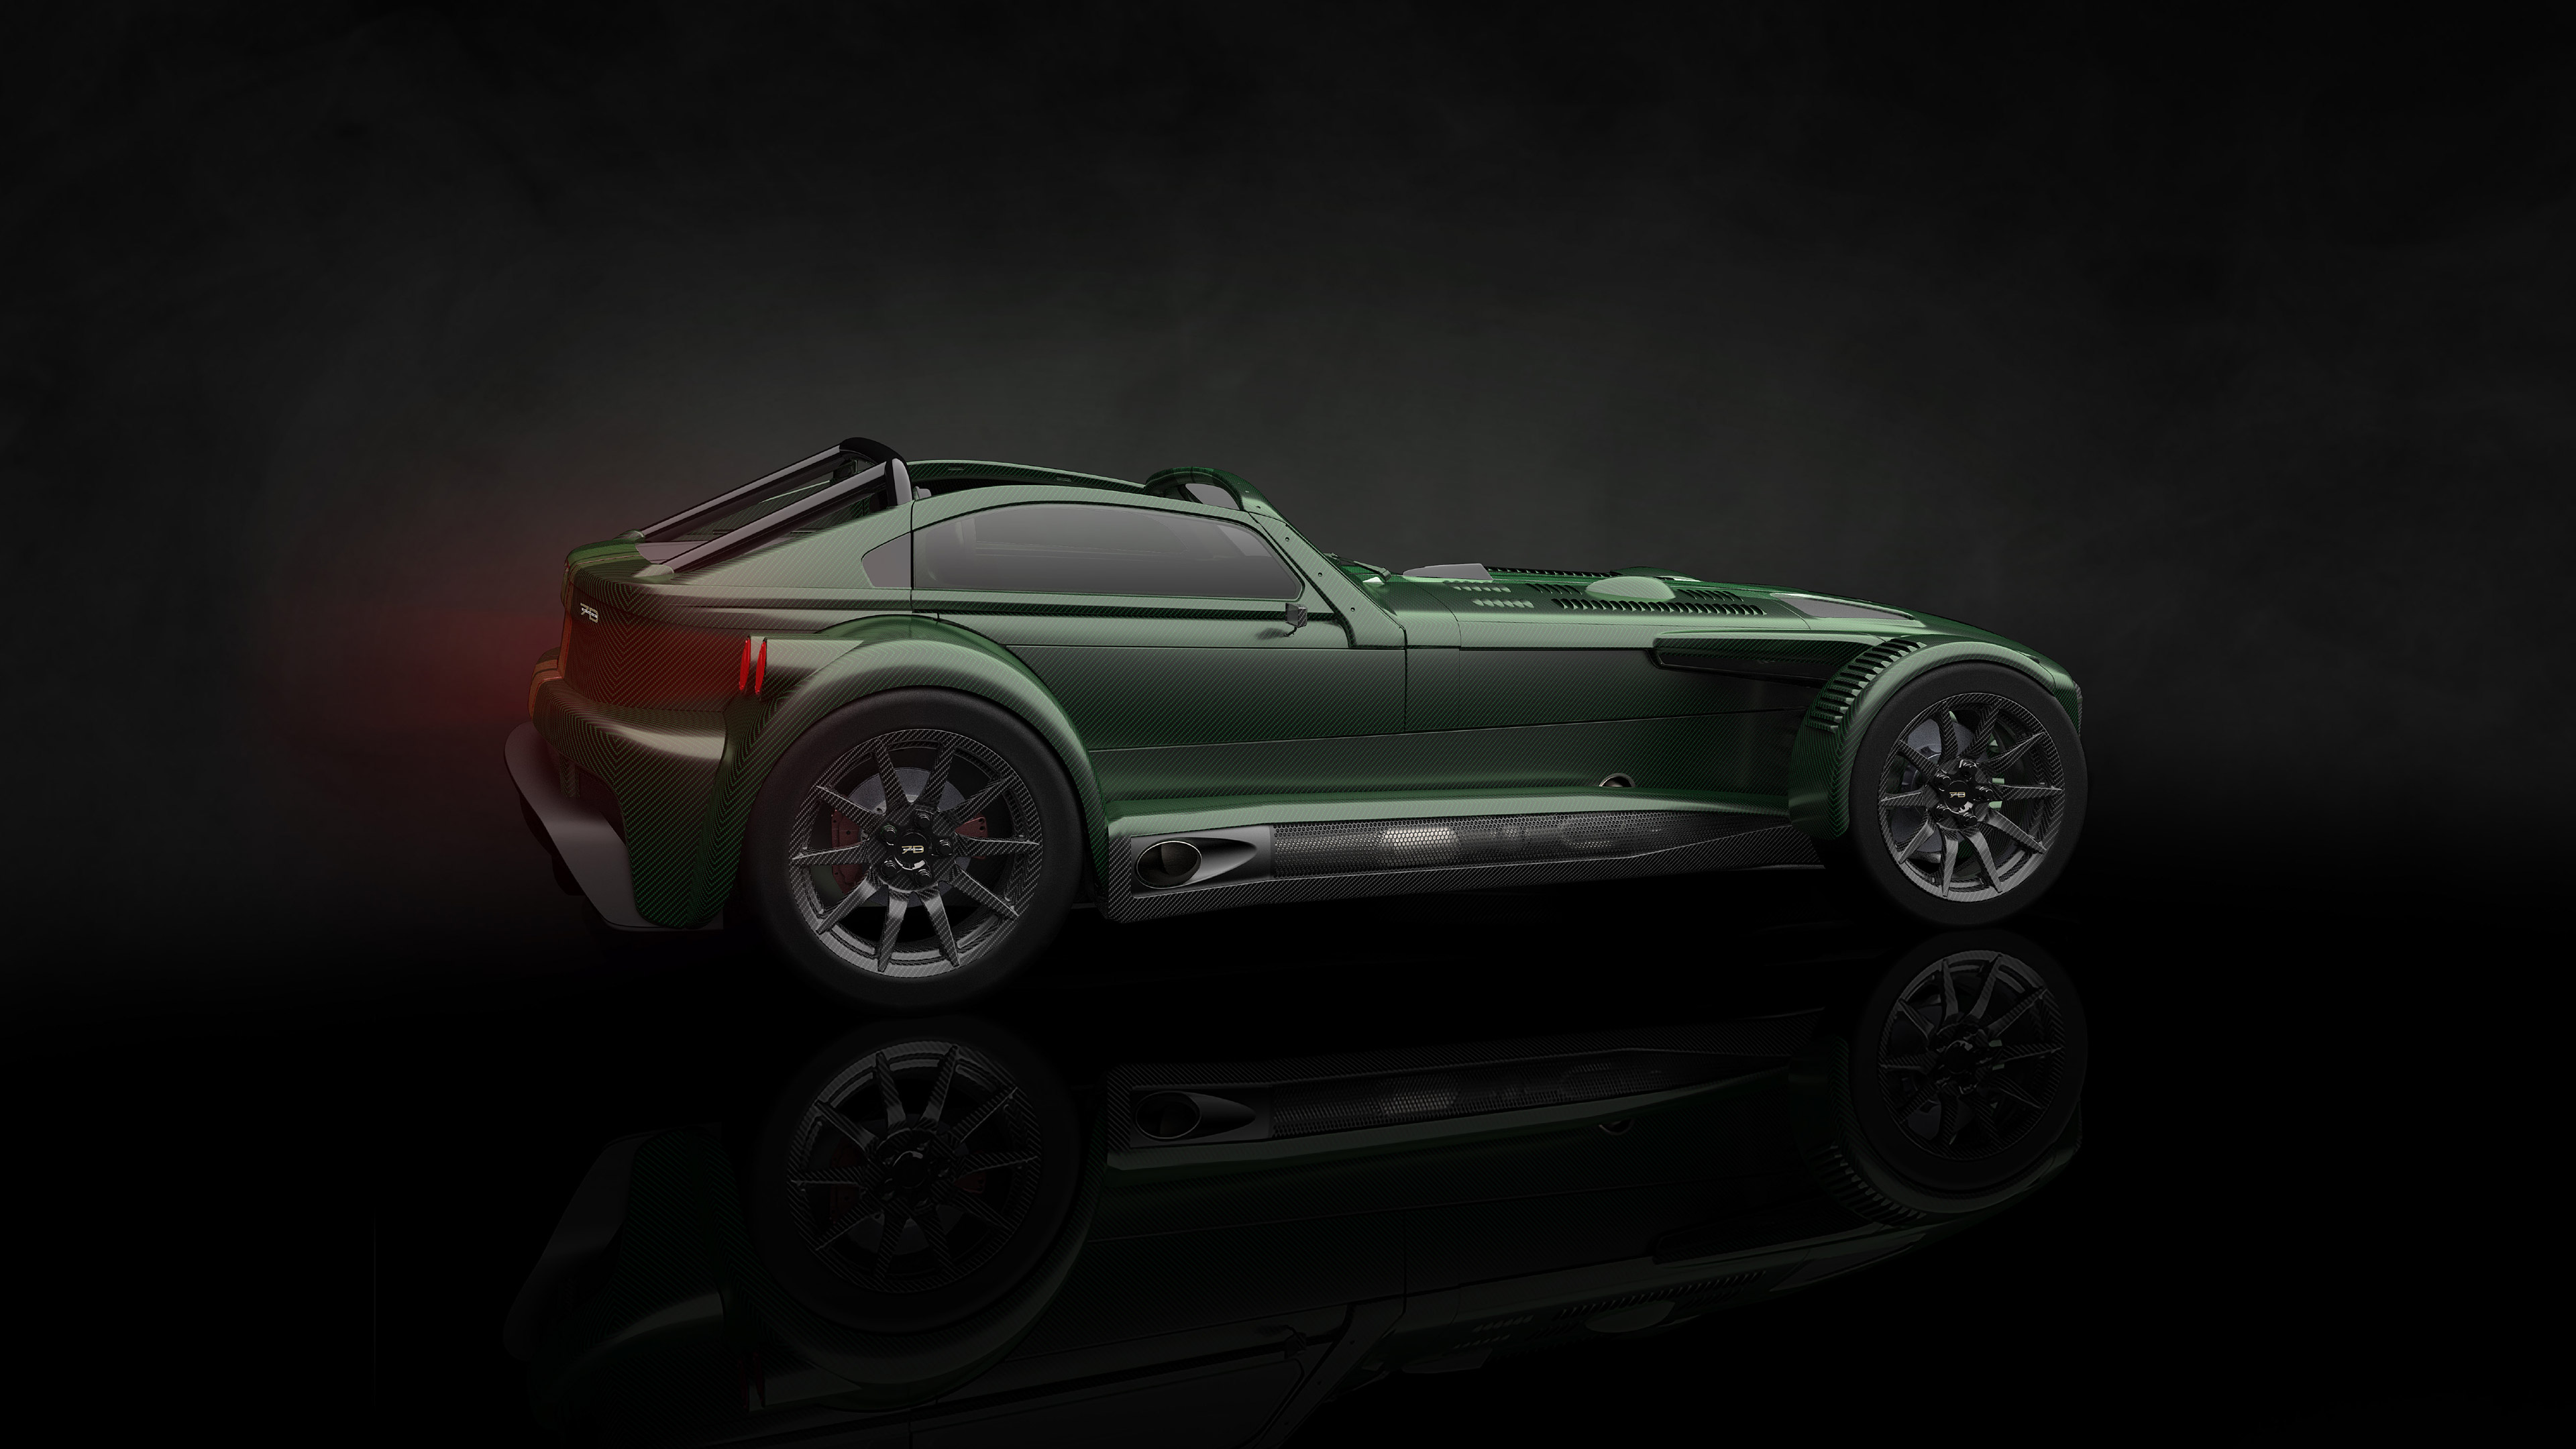 Donkervoort D8 Gto-Jd70 Wallpapers